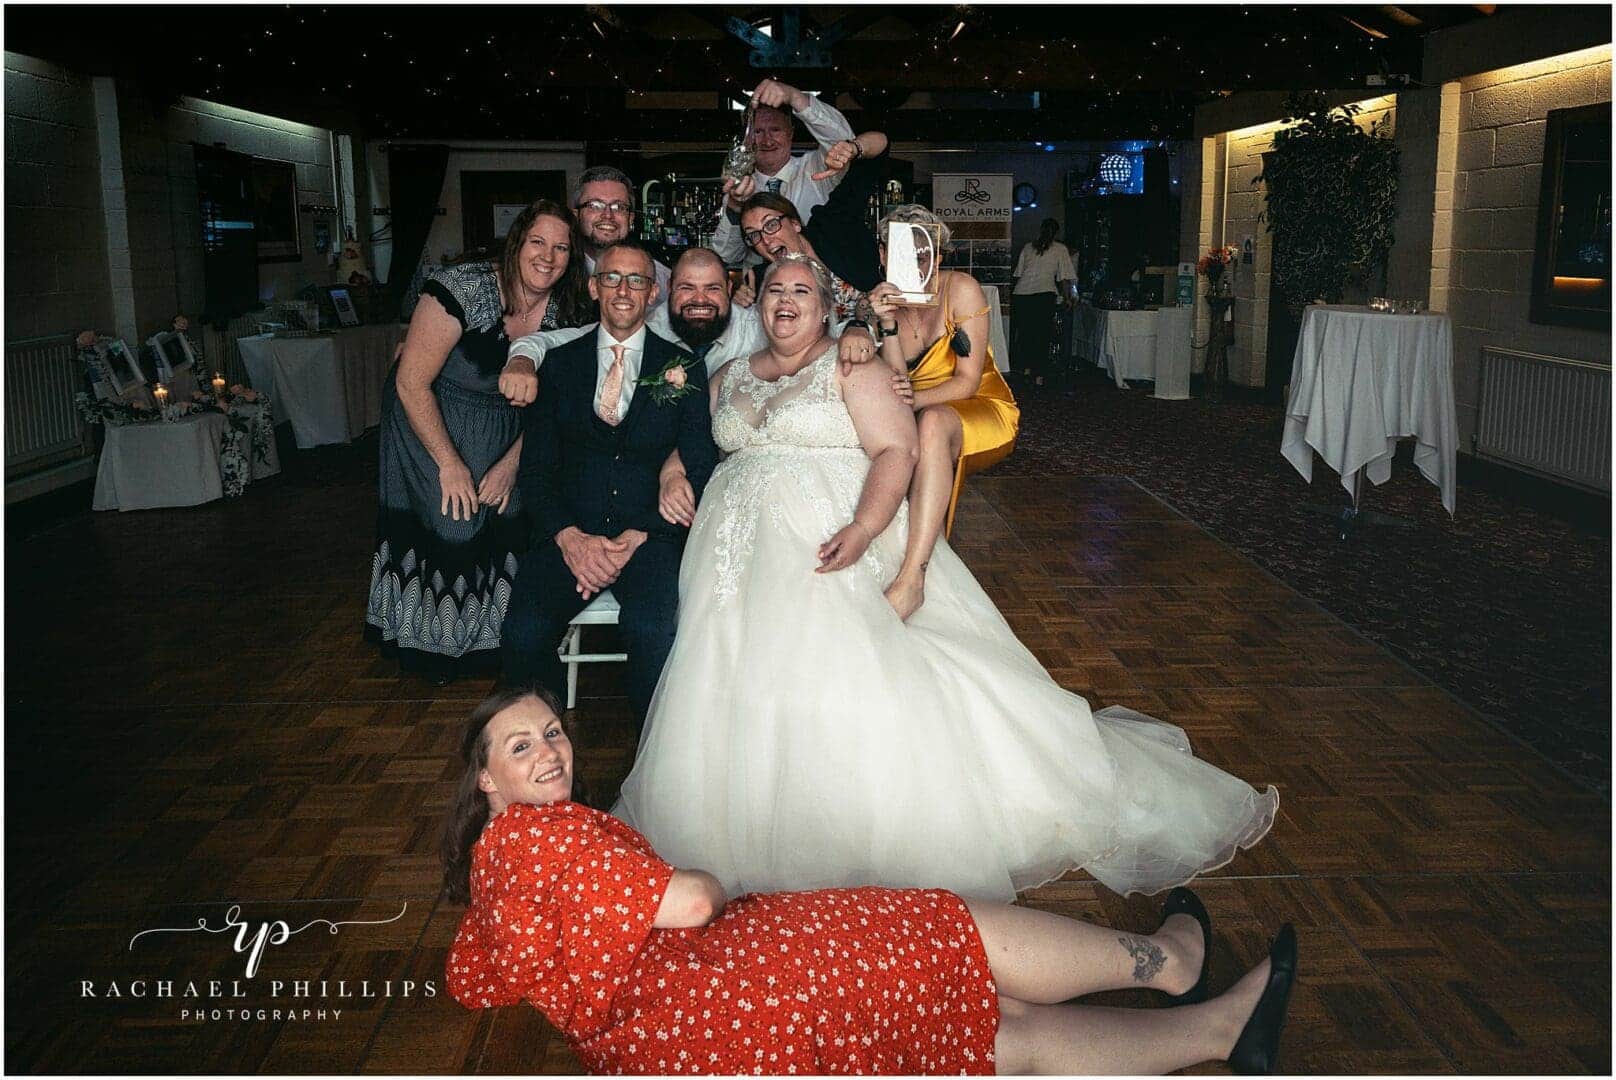 funny photos of the brides, groom and their guests